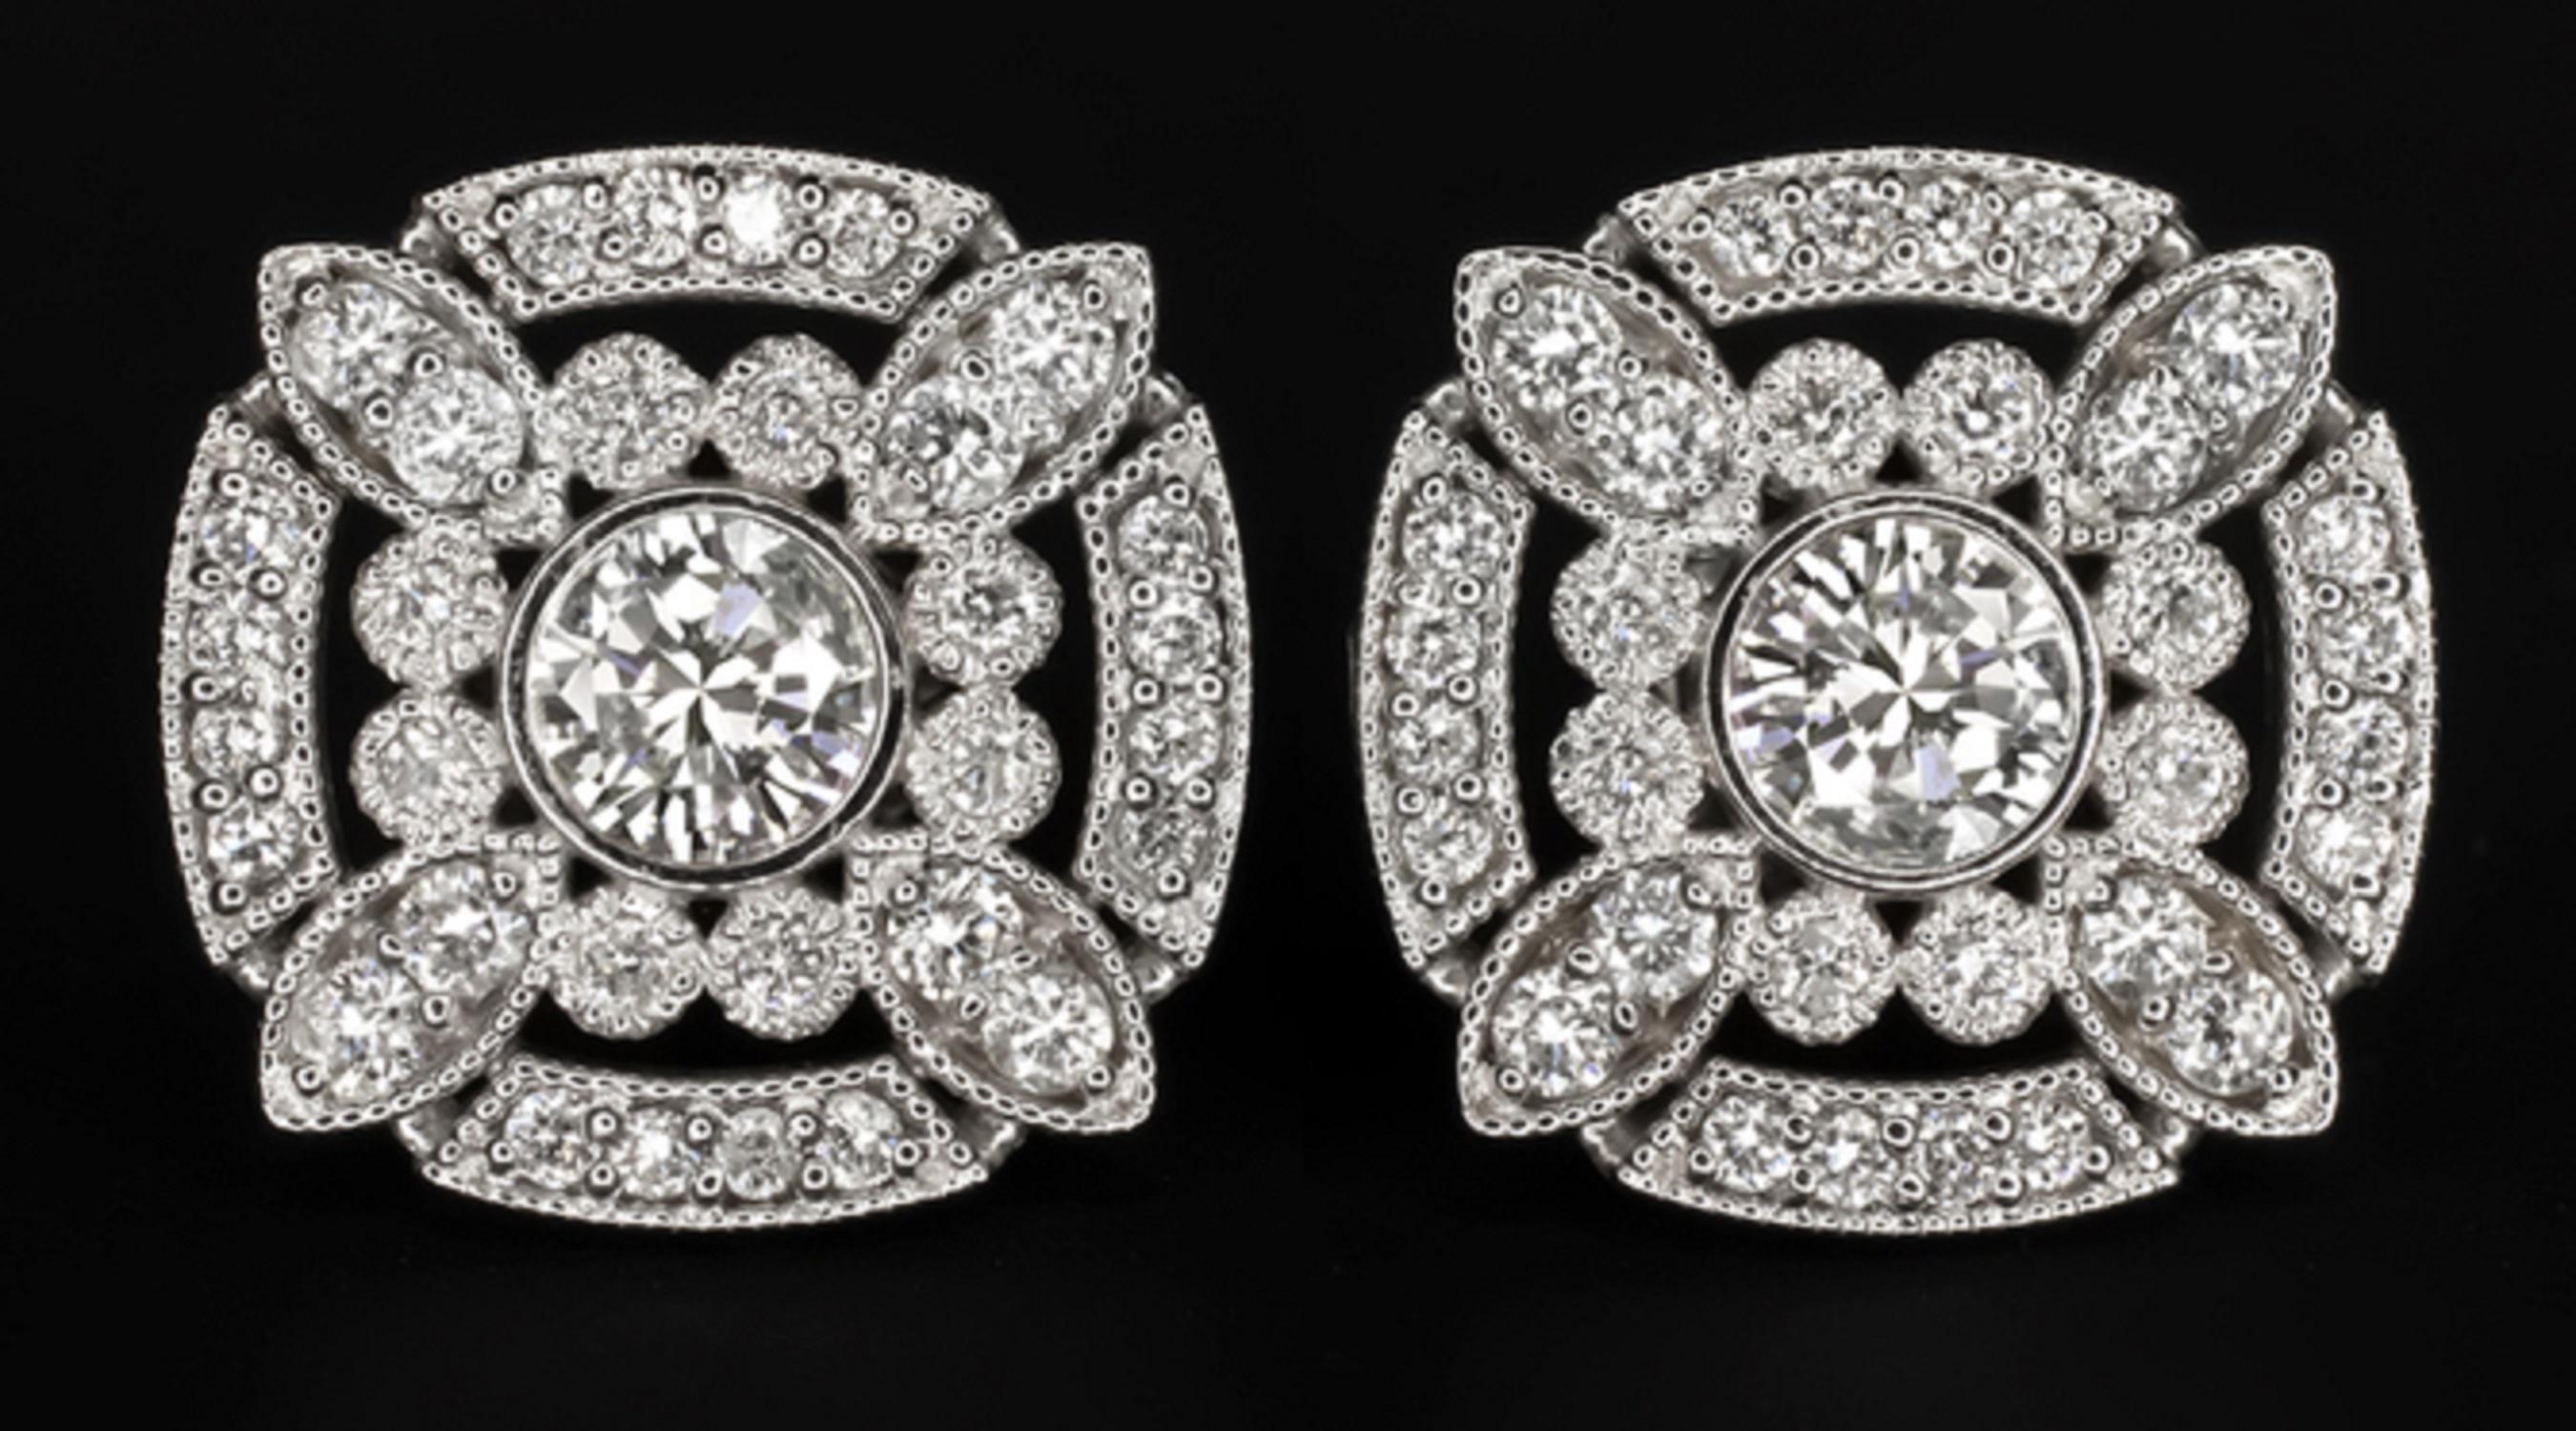 Magnificent stud earrings bring the glamour with a chic and sophisticated Art Deco style design! Featuring a vibrant half carat pair of round brilliant cut diamonds, the geometric double halo design glitters with an additional 0.40ct of vibrant pave